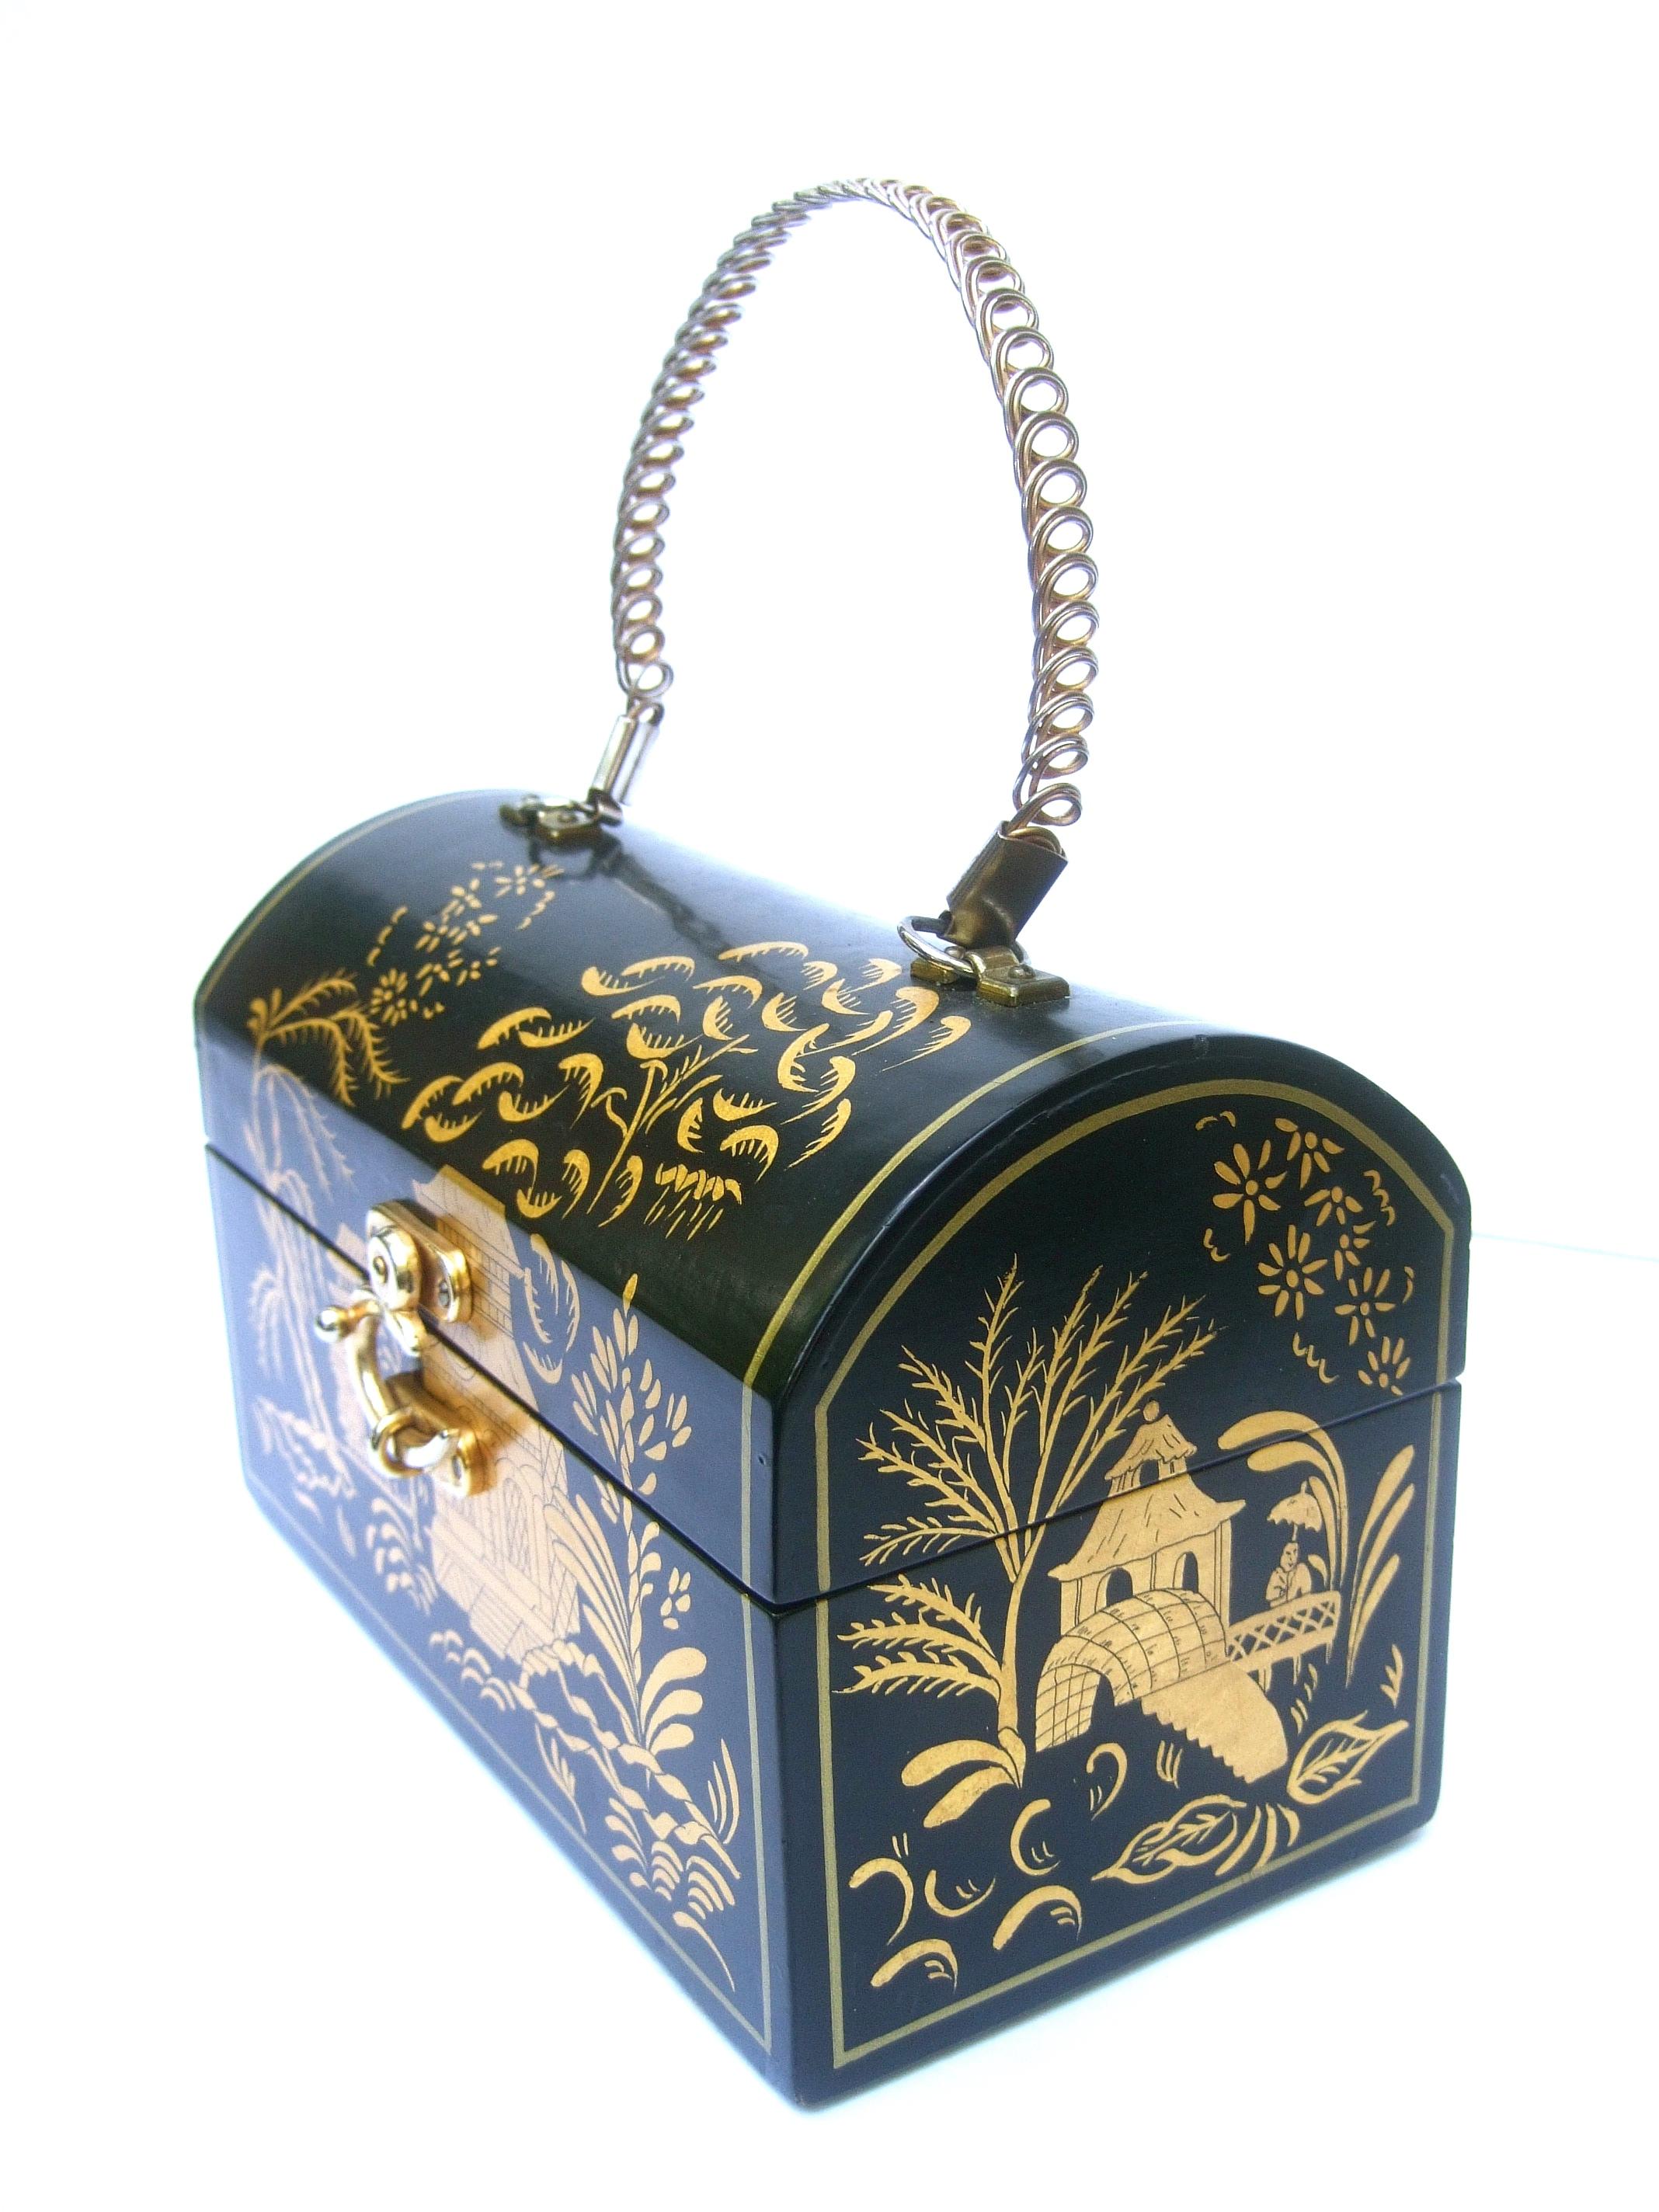 1970s Chinoiserie Black & Gold Hand Painted Wood Artisan Box Purse 5